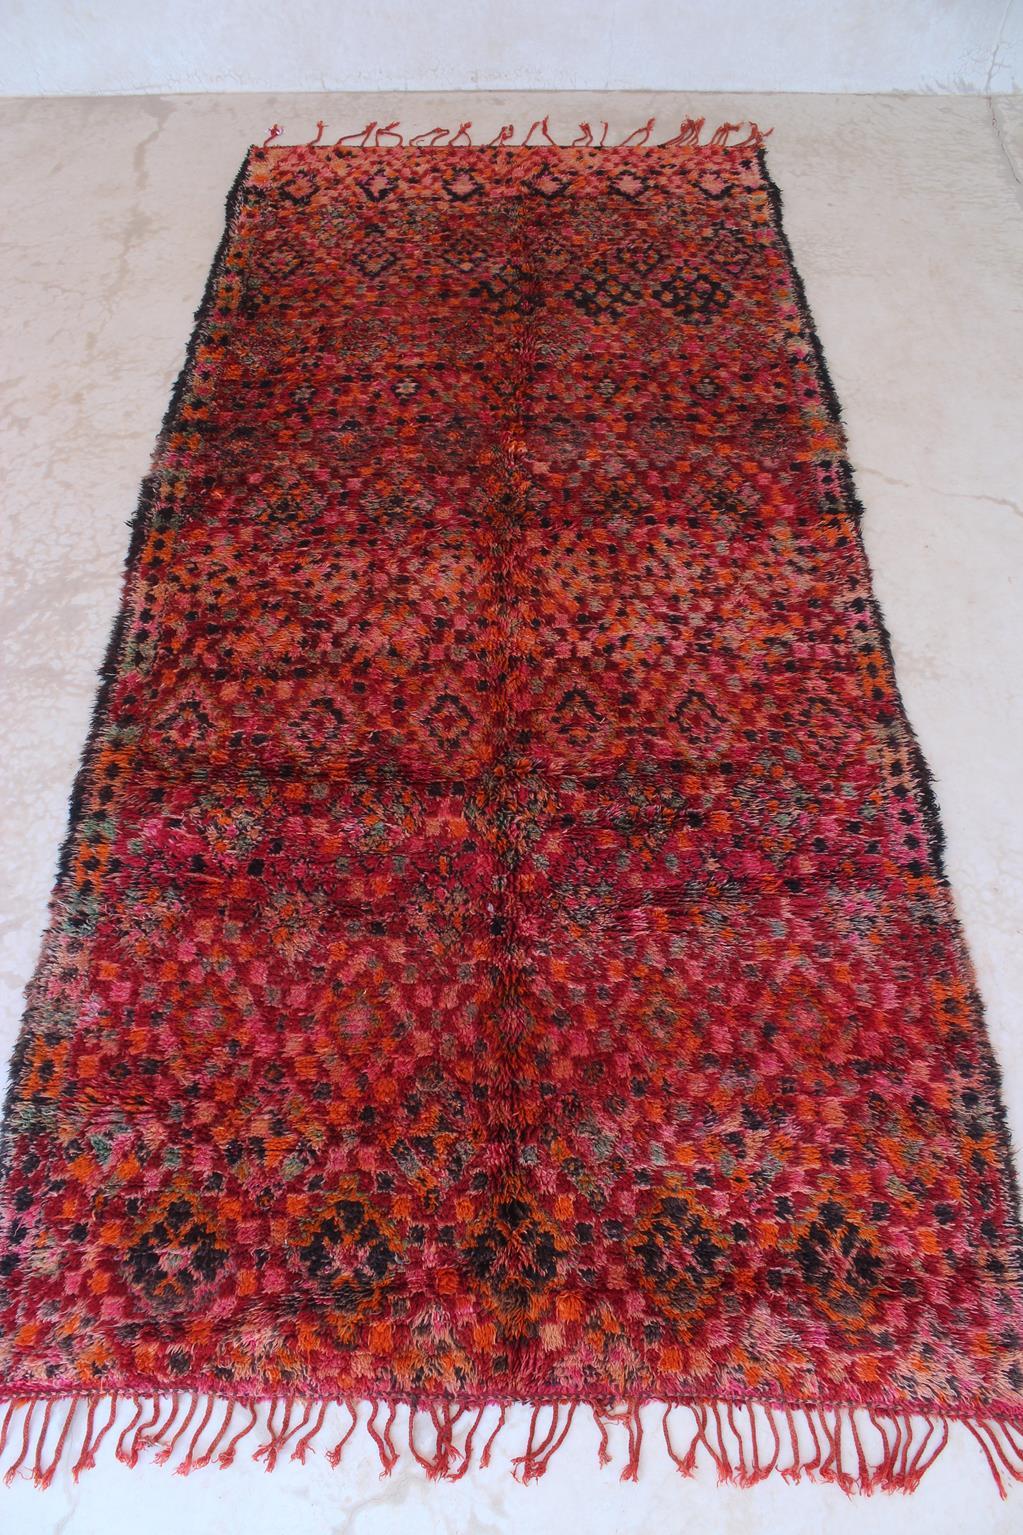 This vintage Beni Mguild rug is gorgeous! The perfect bohemian rug to bring warmth and character to your space!

The background color of this rug is a bright red but I guess you can tell from the pictures attached that it shows different shades. The